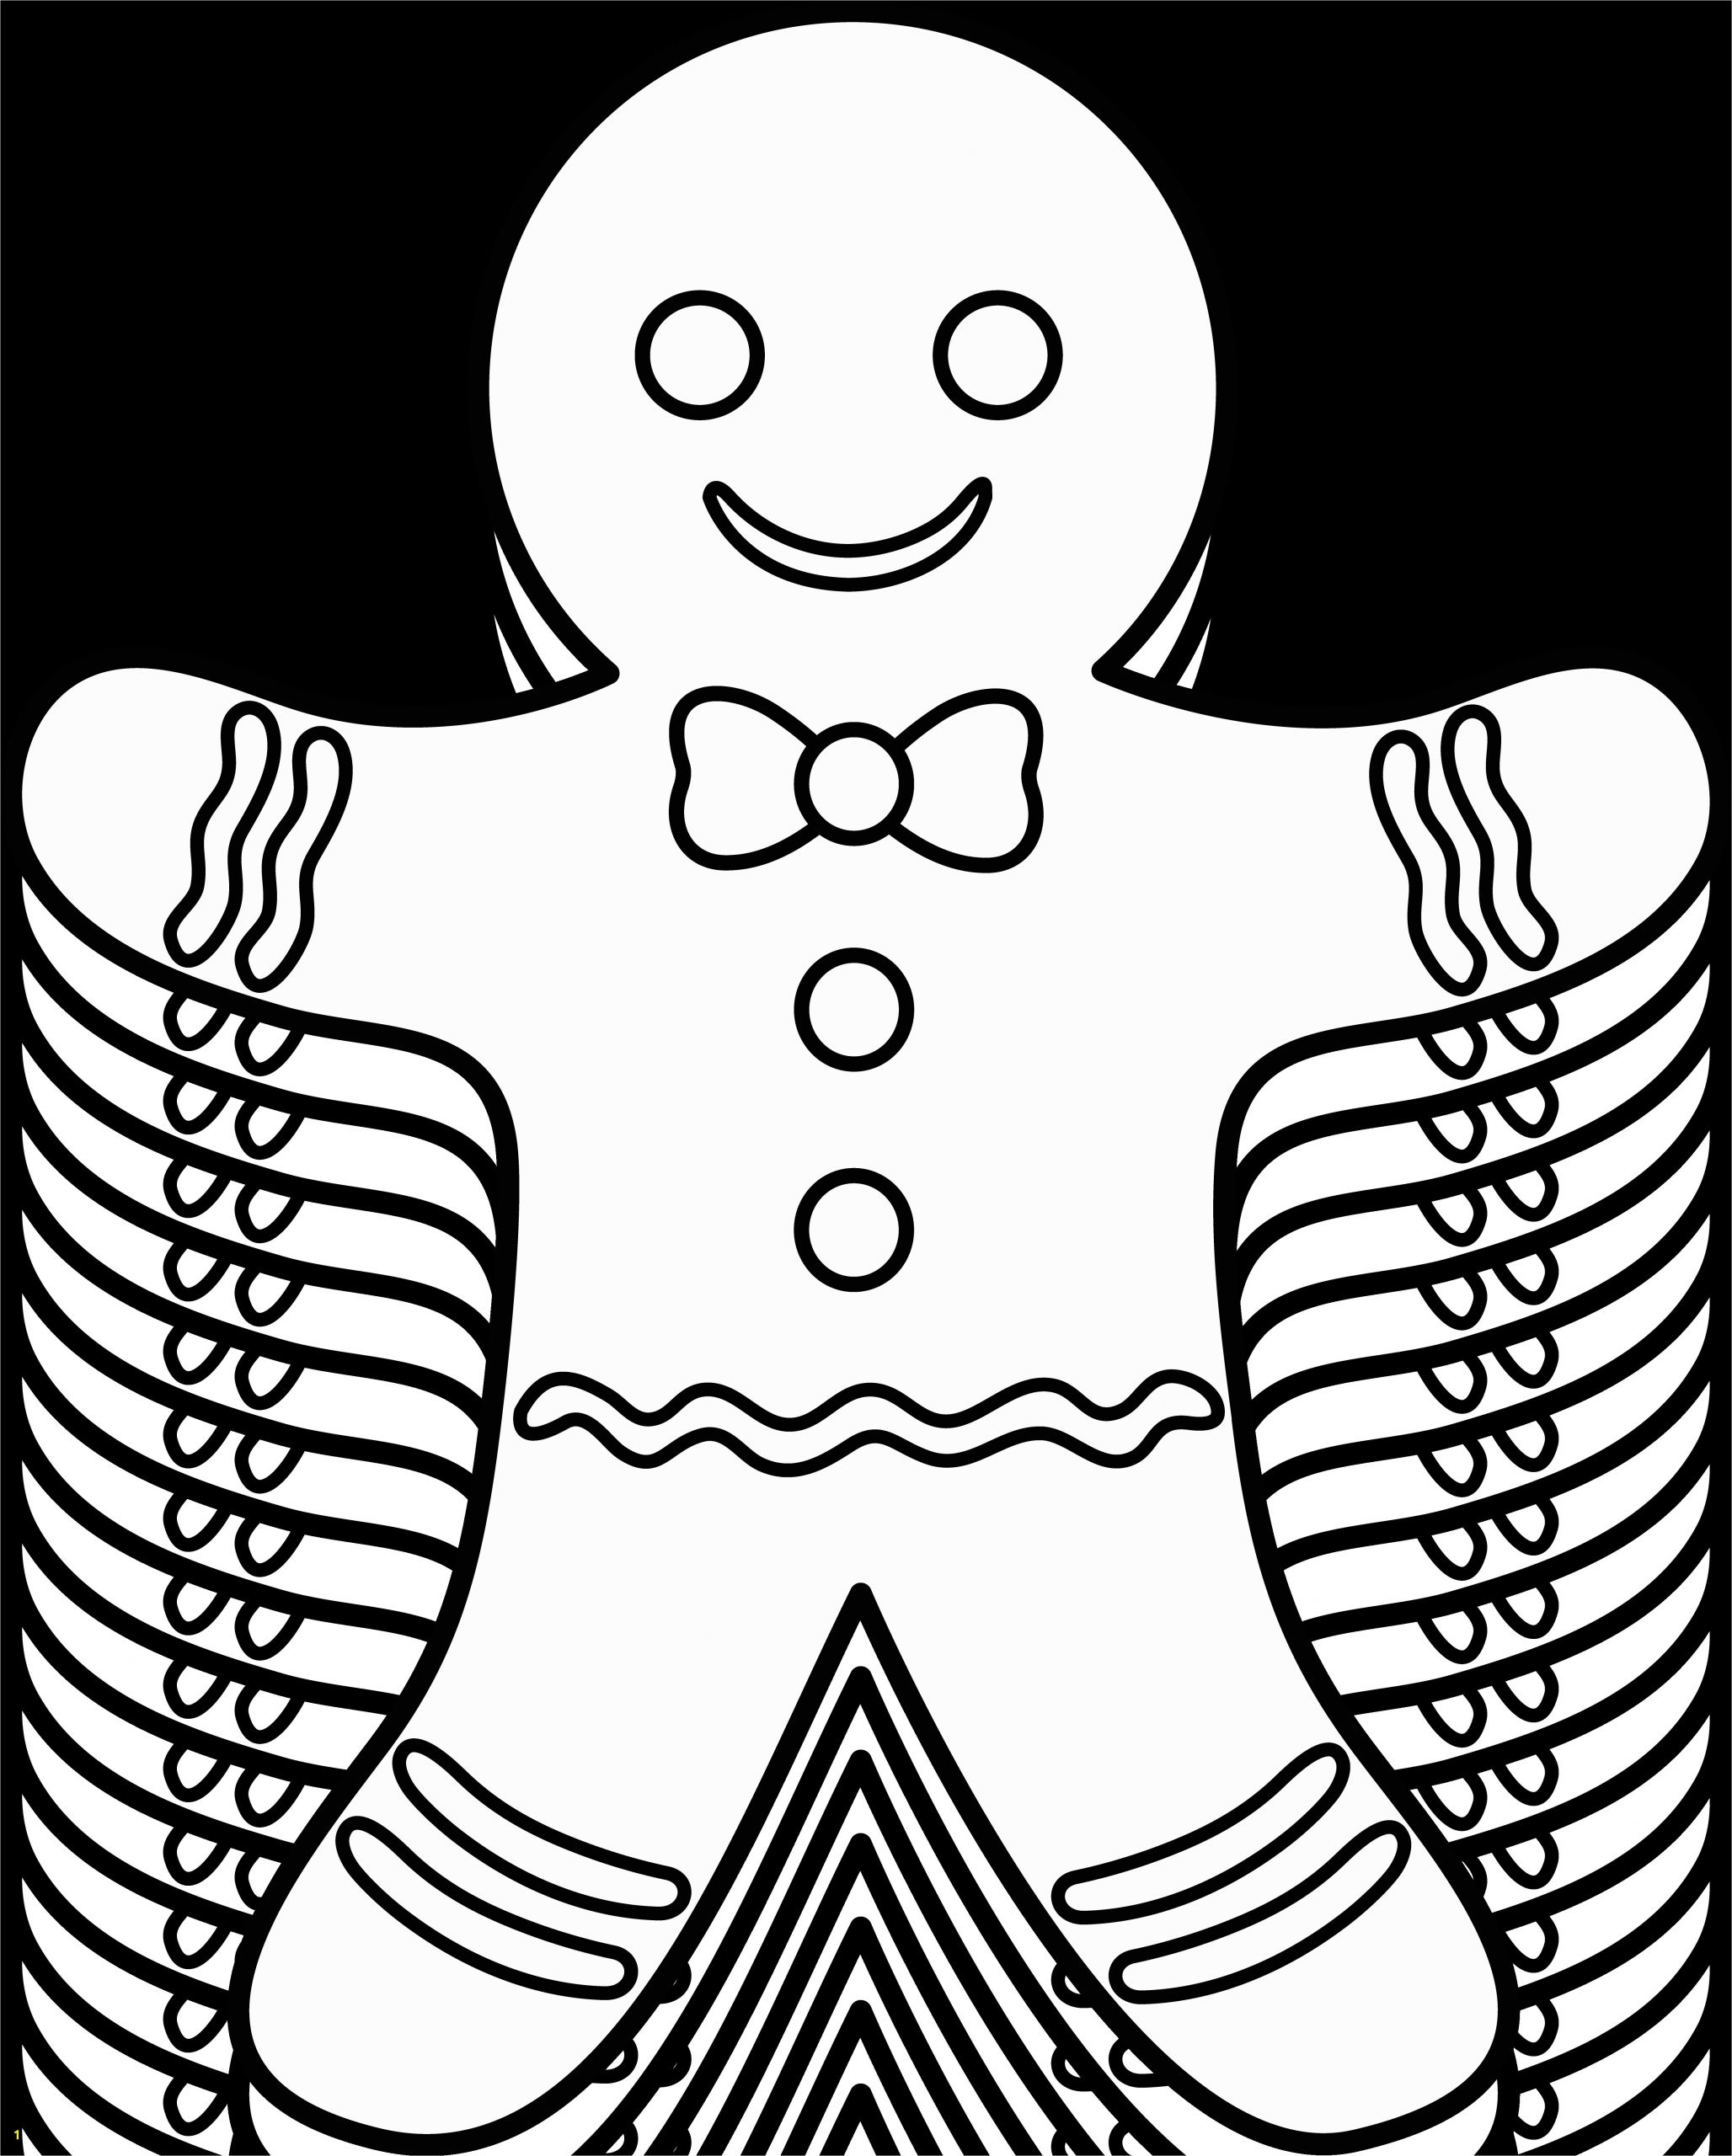 Christmas Gingerbread Coloring Page Christmas Lights Coloring Page This Would Be Fun to Color